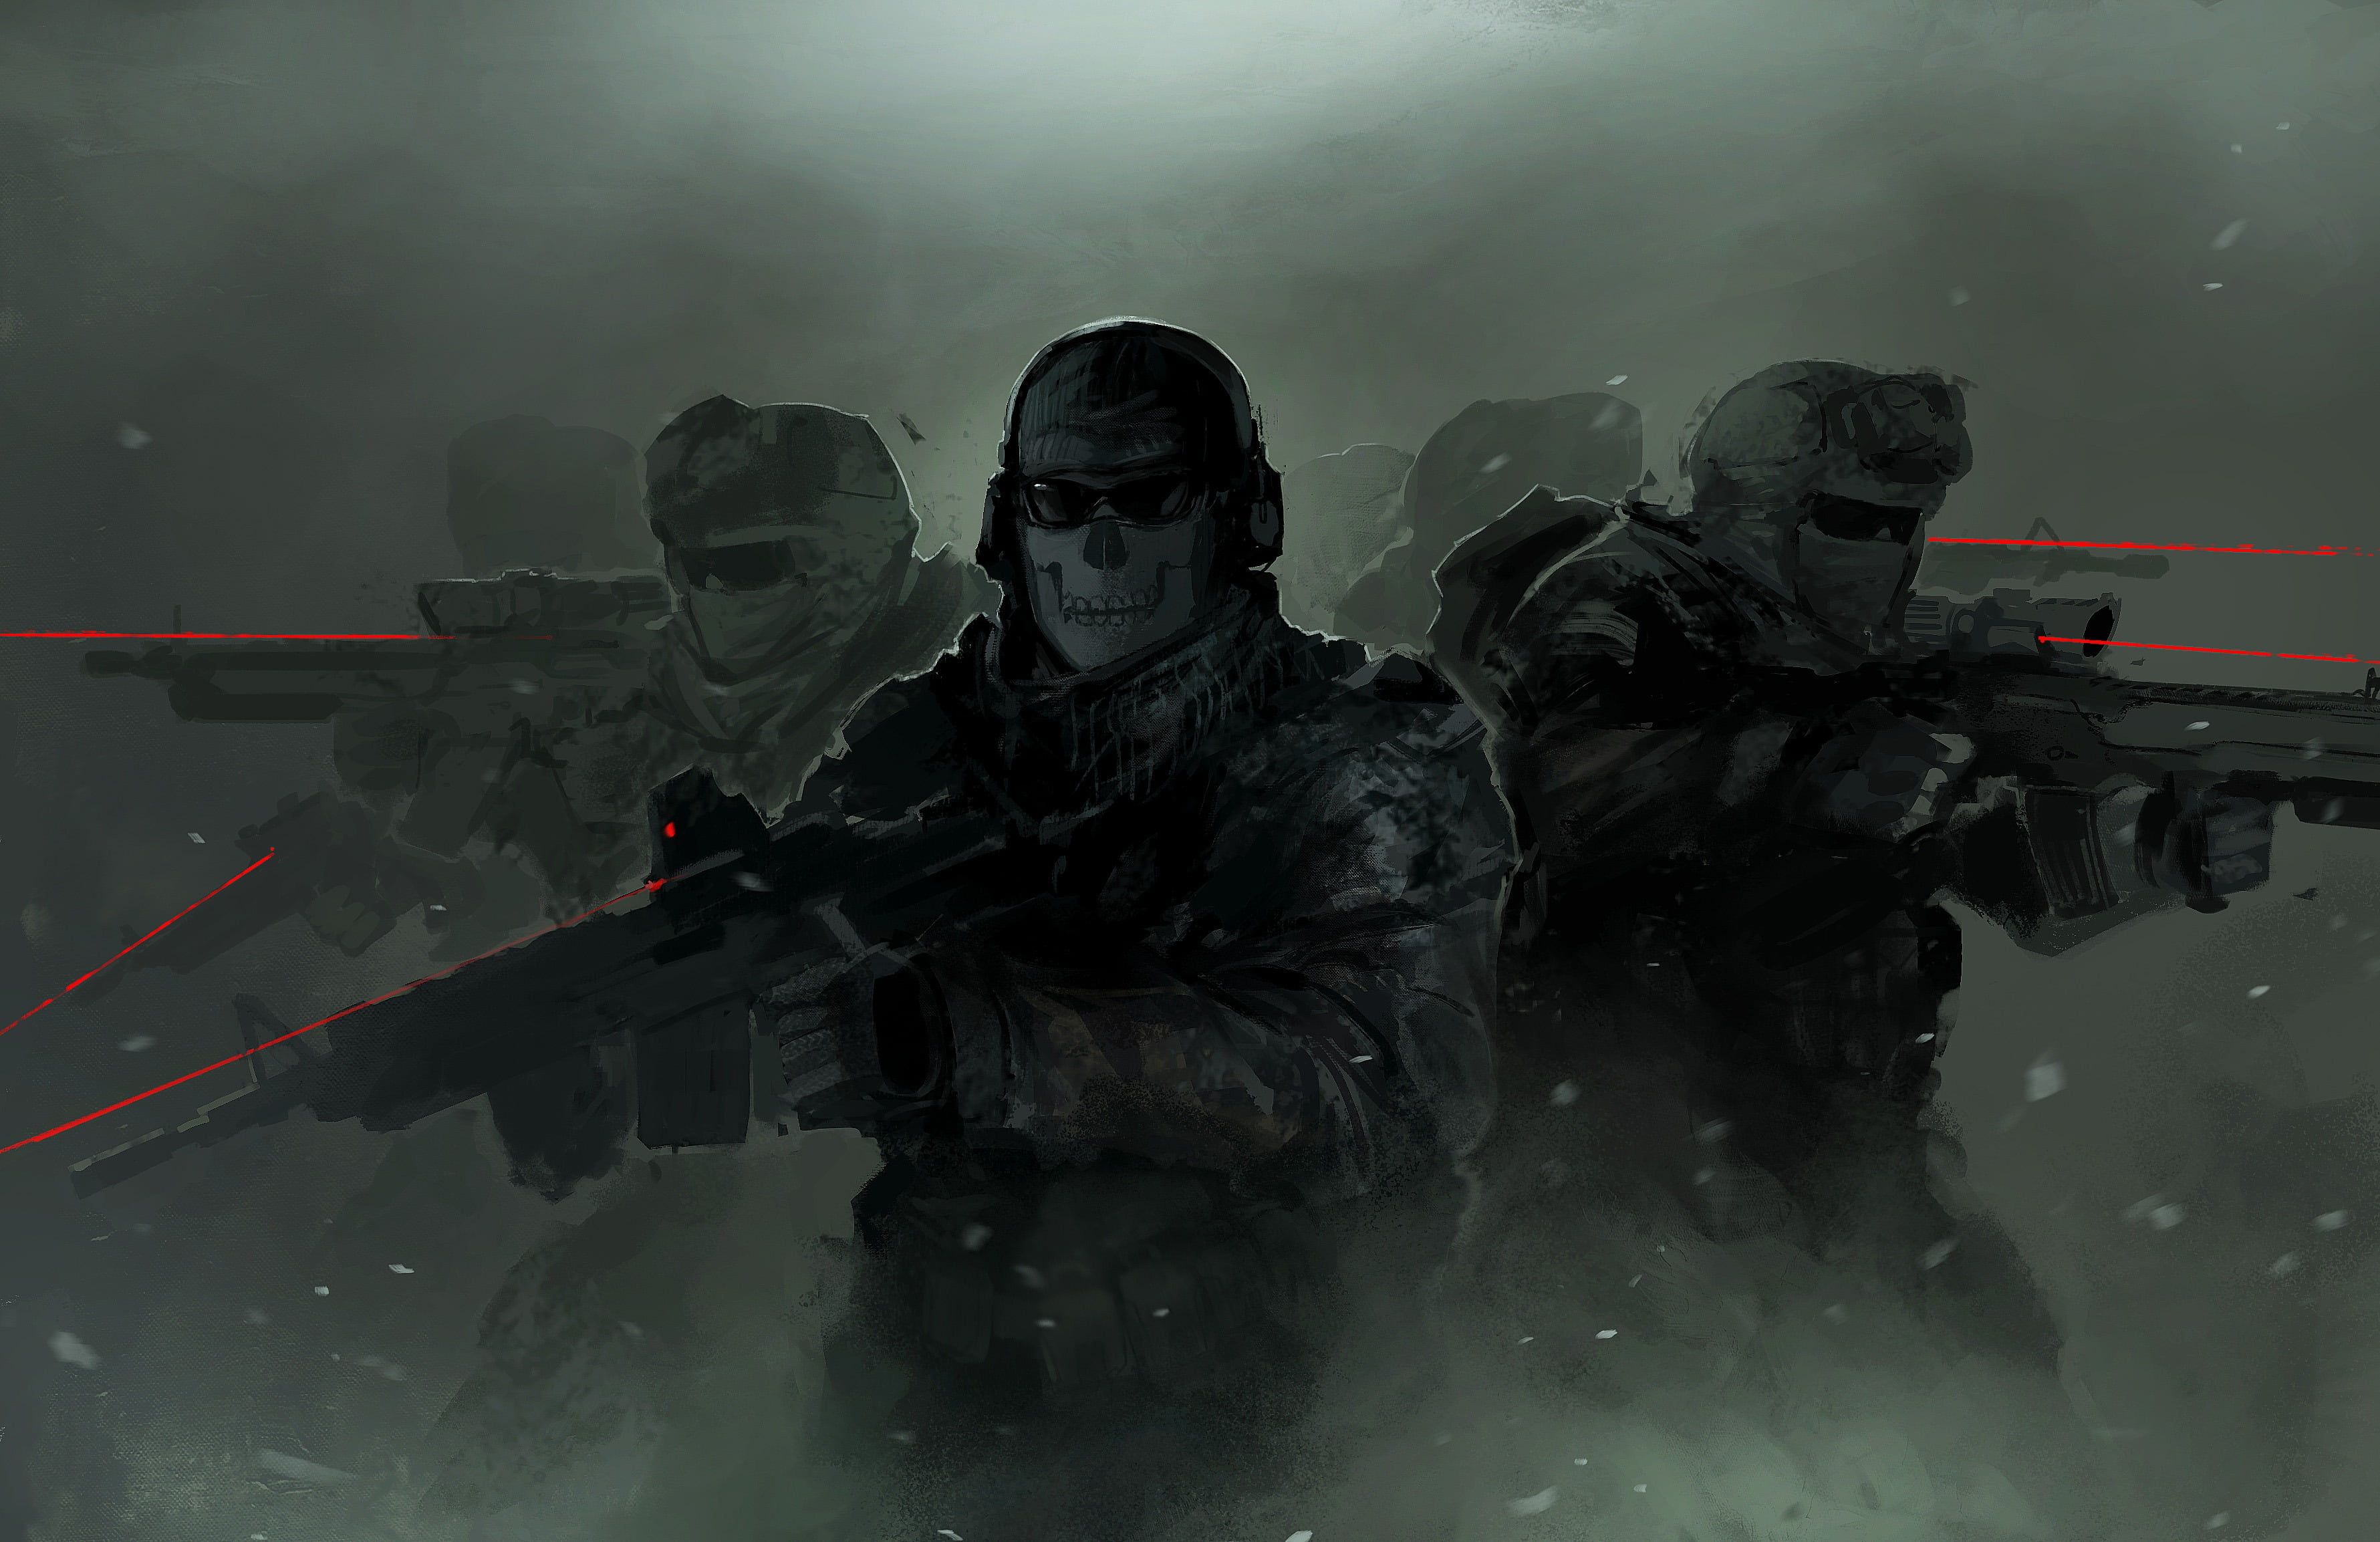 game application digital wallpaper #soldiers #ghost #Activision Infinity Ward Call of Duty: Modern Warfare 2. Call of duty ghosts, Call of duty, Modern warfare